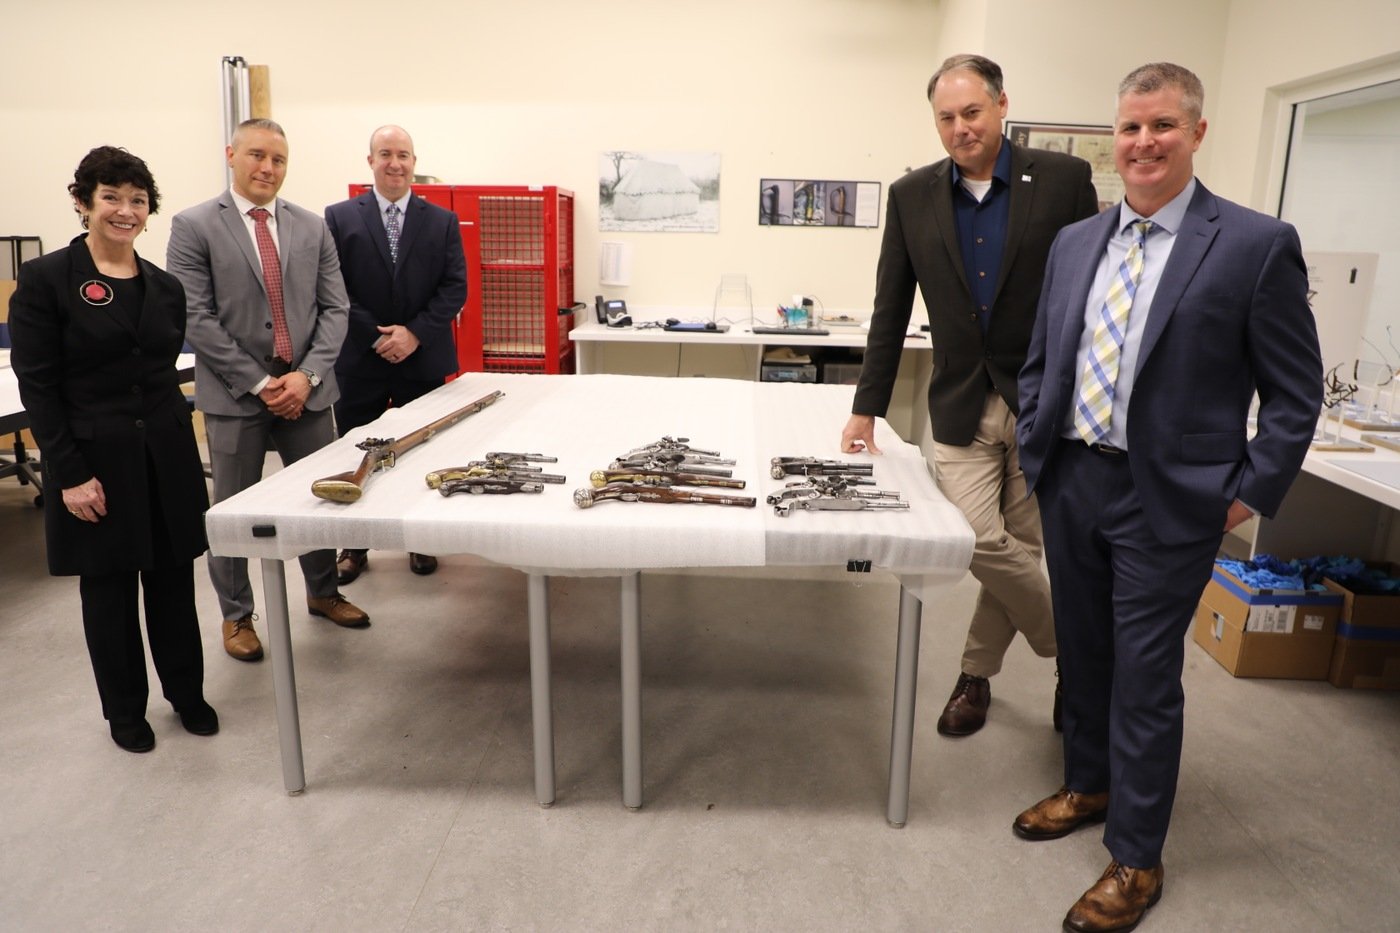 (From left to right) Assistant U.S. Attorney K.T. Newton of the U.S. Attorney's Office for the Eastern District of Pennsylvania, FBI Philadelphia Special Agent Jake Archer,  Detective Andy Rathfon of the Upper Merion Township Police Department in Pennsylvania, Museum of the American Revolution President and CEO Scott Stephenson, and Upper Merion Township Police Detective Brendan Dougherty pose alongside Revolutionary War-era firearms they collectively helped recover. The photo was captured in January 2024 at the museum in Philadelphia.